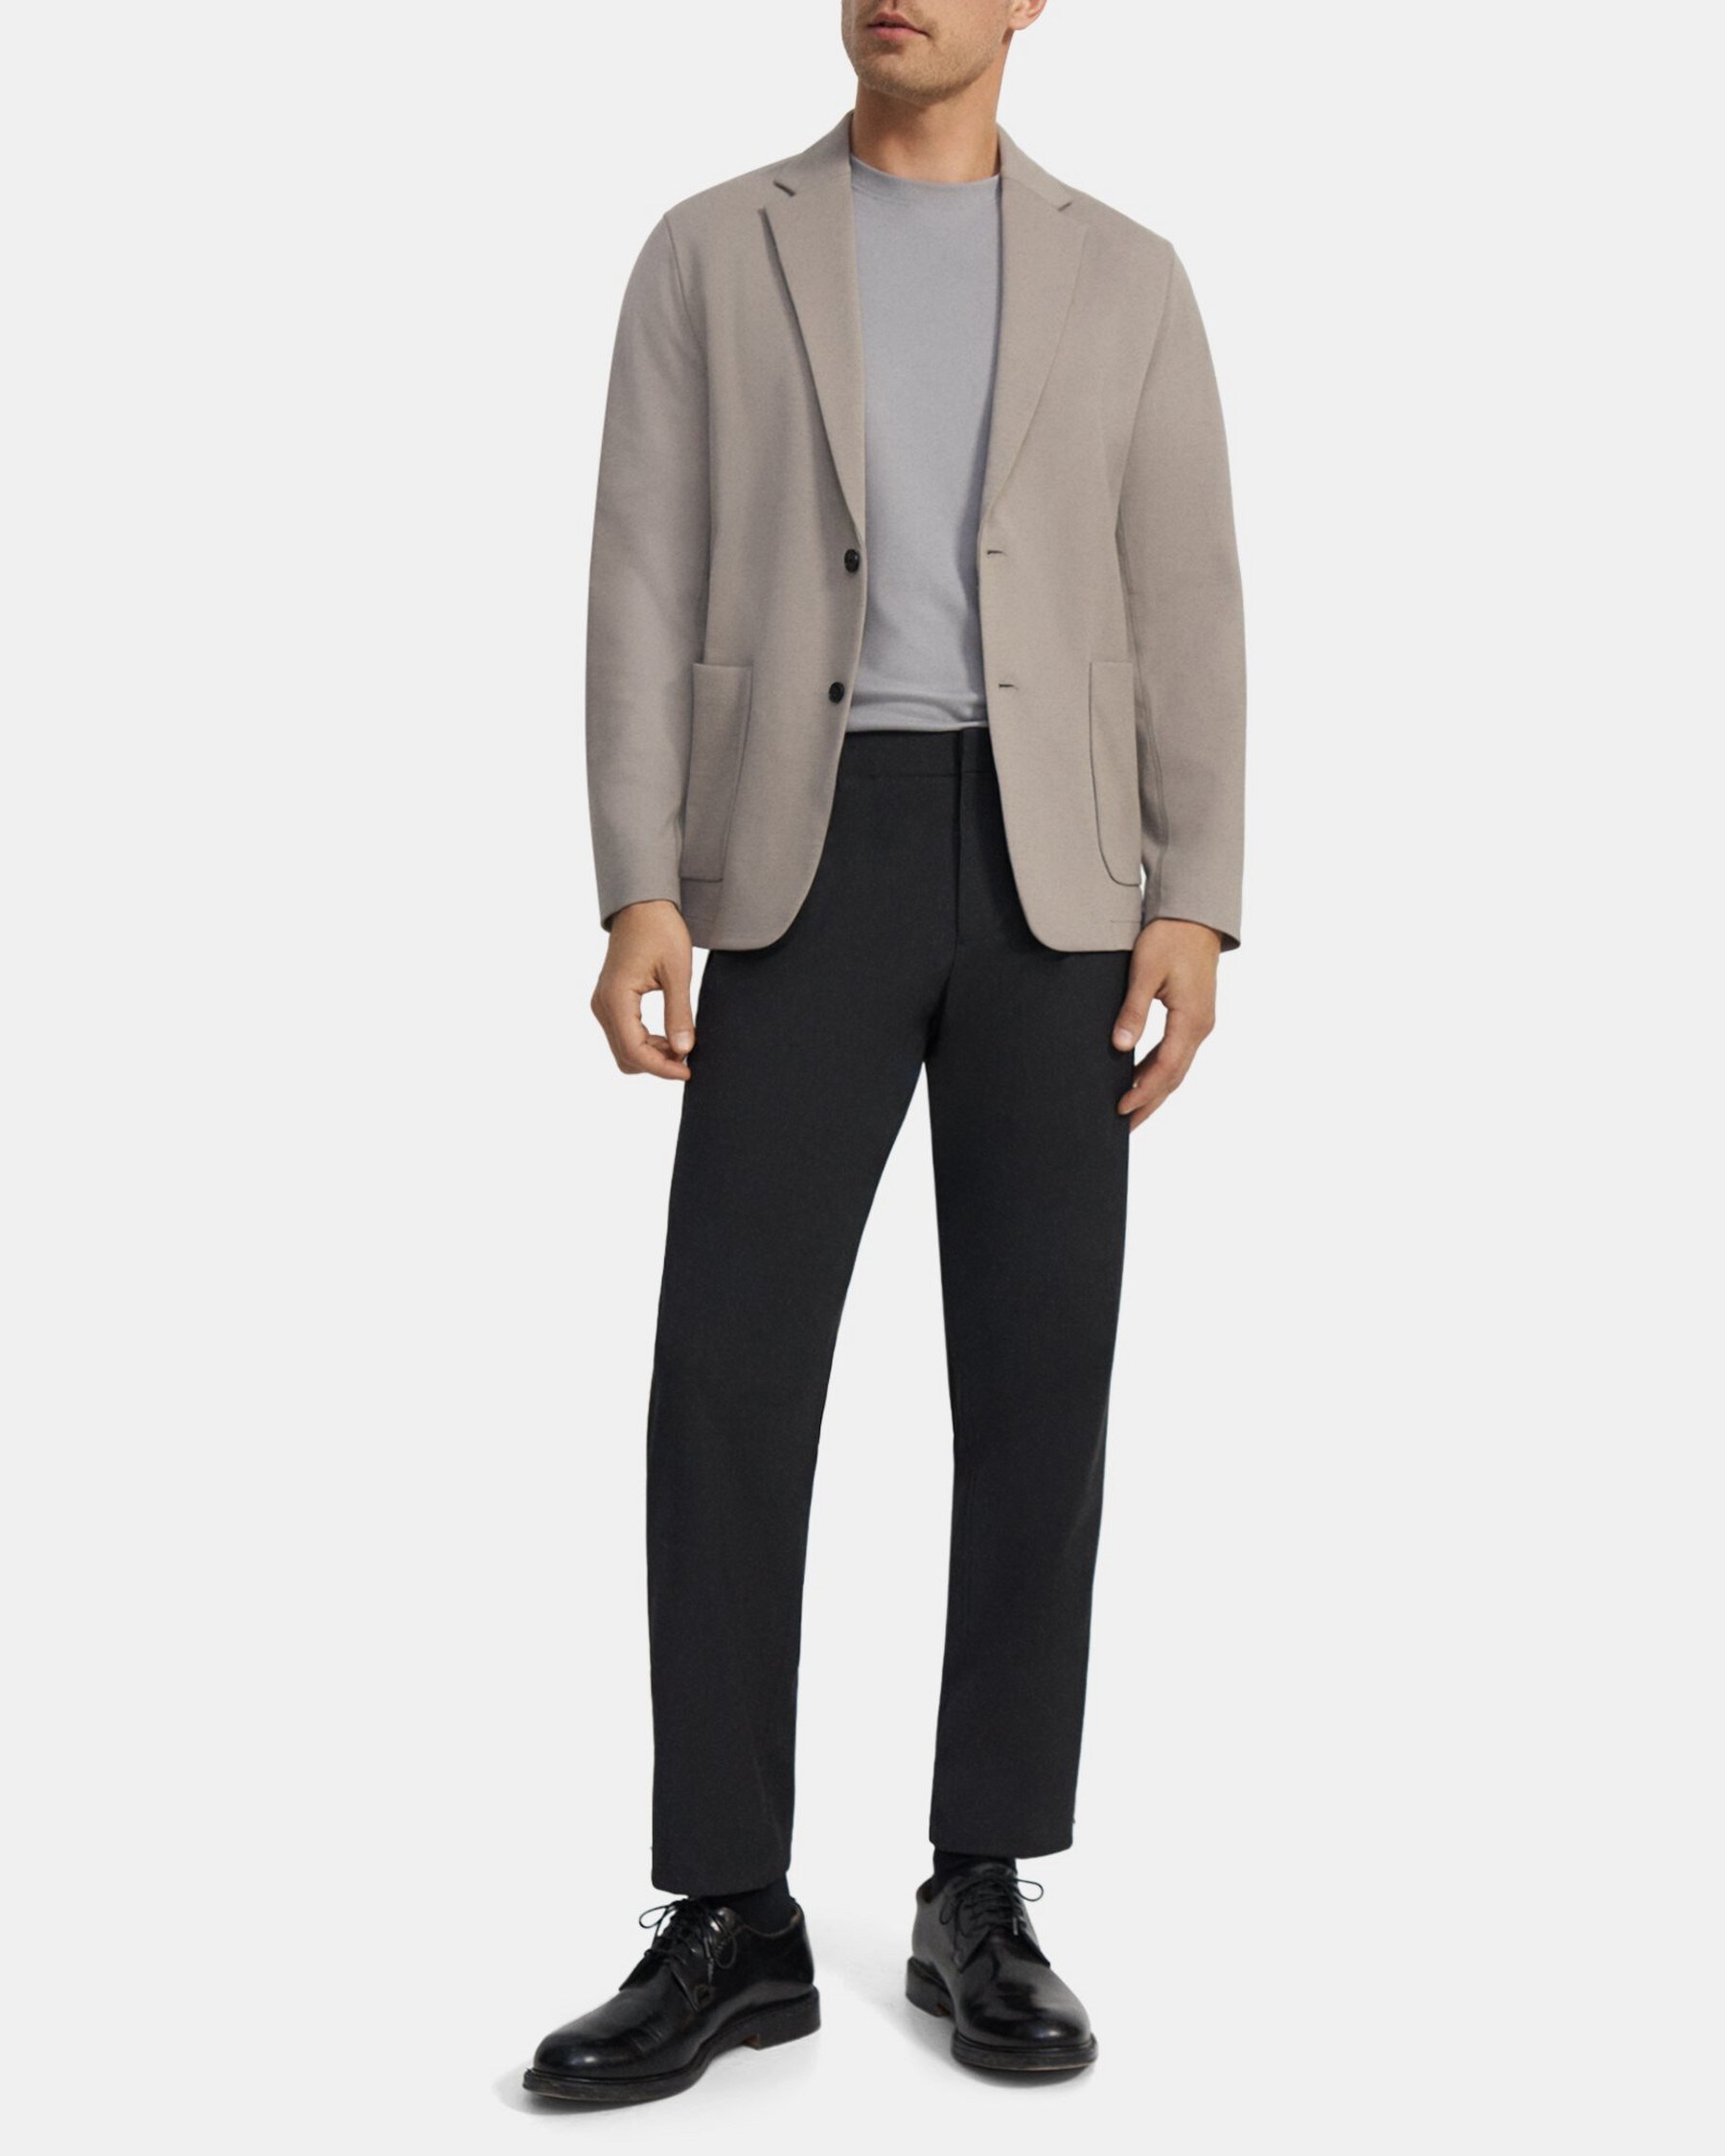 Theory Unstructured Suit Jacket in Stretch Wool Ponte